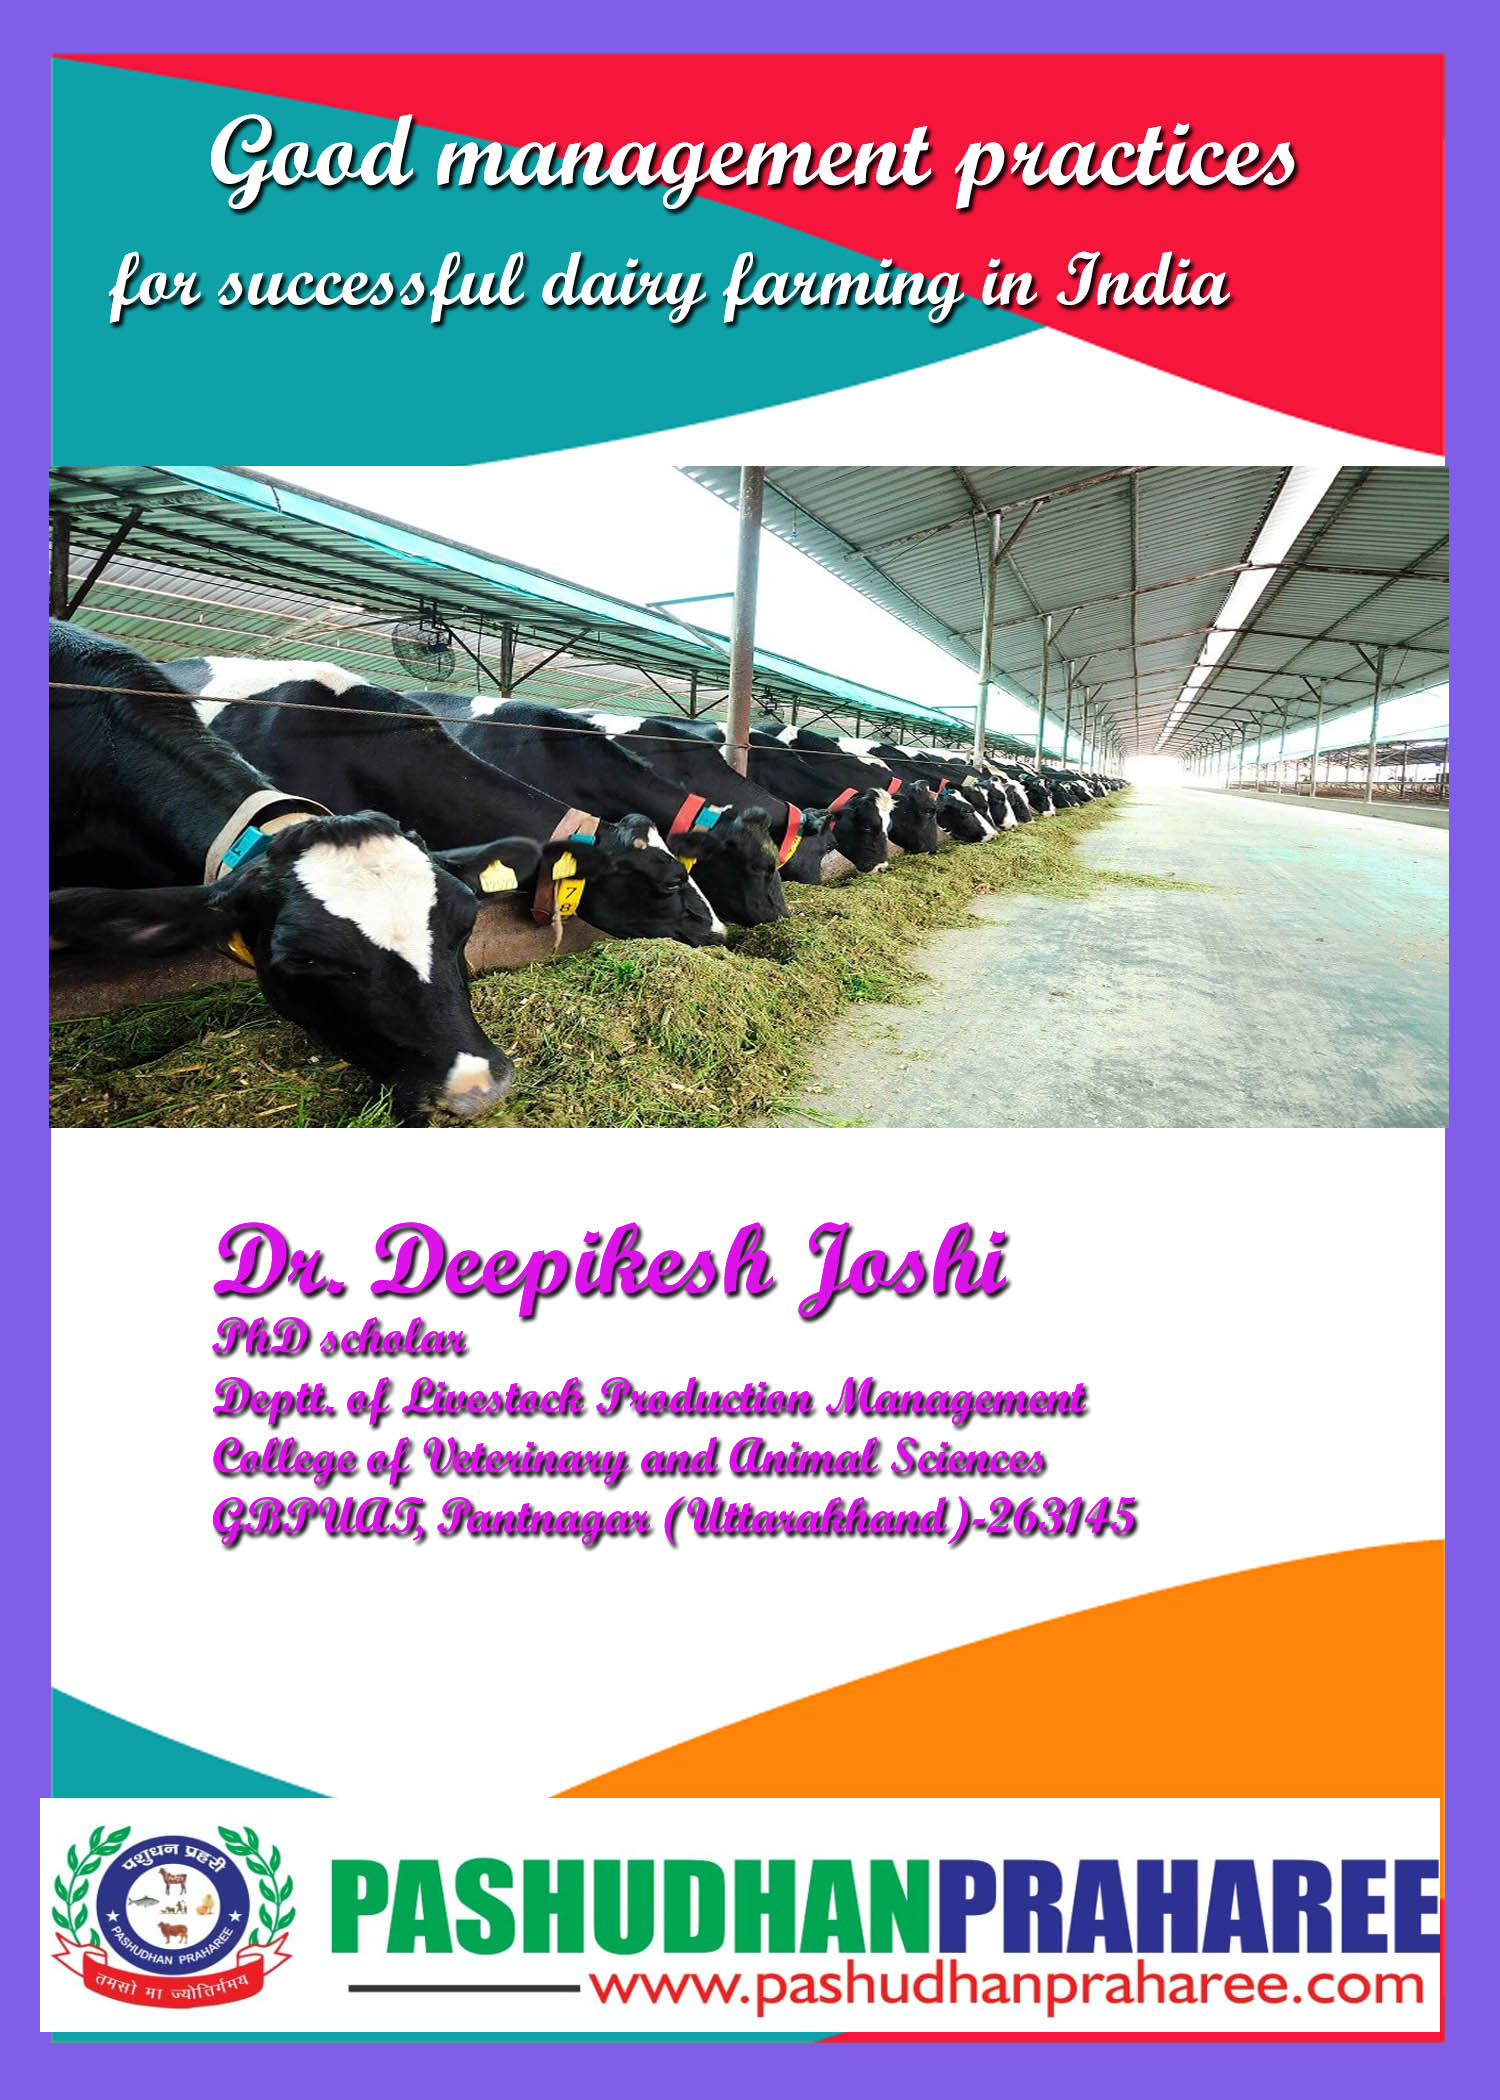 Good management practices for successful dairy farming in India – Pashudhan  praharee